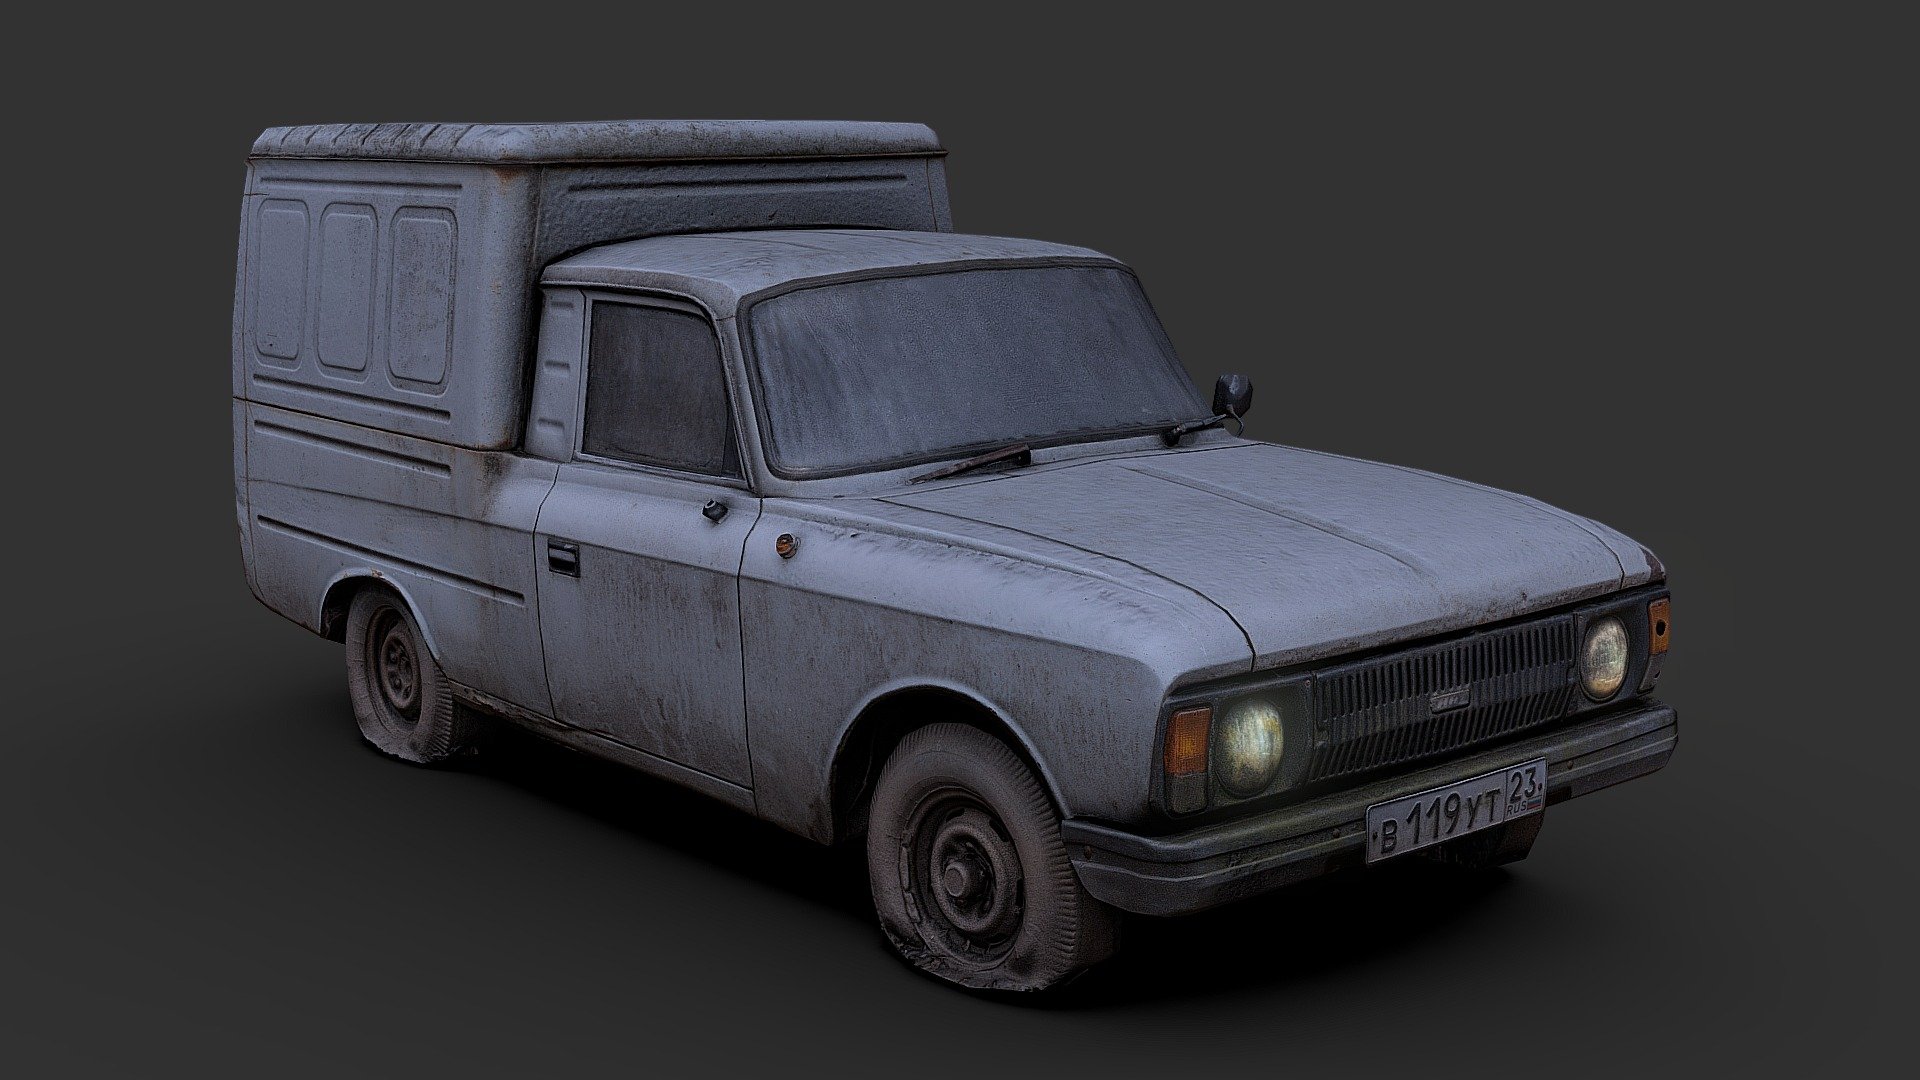 Retopo of Mikhail Volkov's Pirozhok scan: https://sketchfab.com/3d-models/abandoned-soviet-car-izh-2715-b97884f0730d42a68c1a6a9a9874159d

I added the effect of glowing lights, reduced it to game-ready resolution, and added materials, enjoy! - Pirozhok Scan Retopo (Free Scan) - Download Free 3D model by Renafox (@kryik1023) 3d model